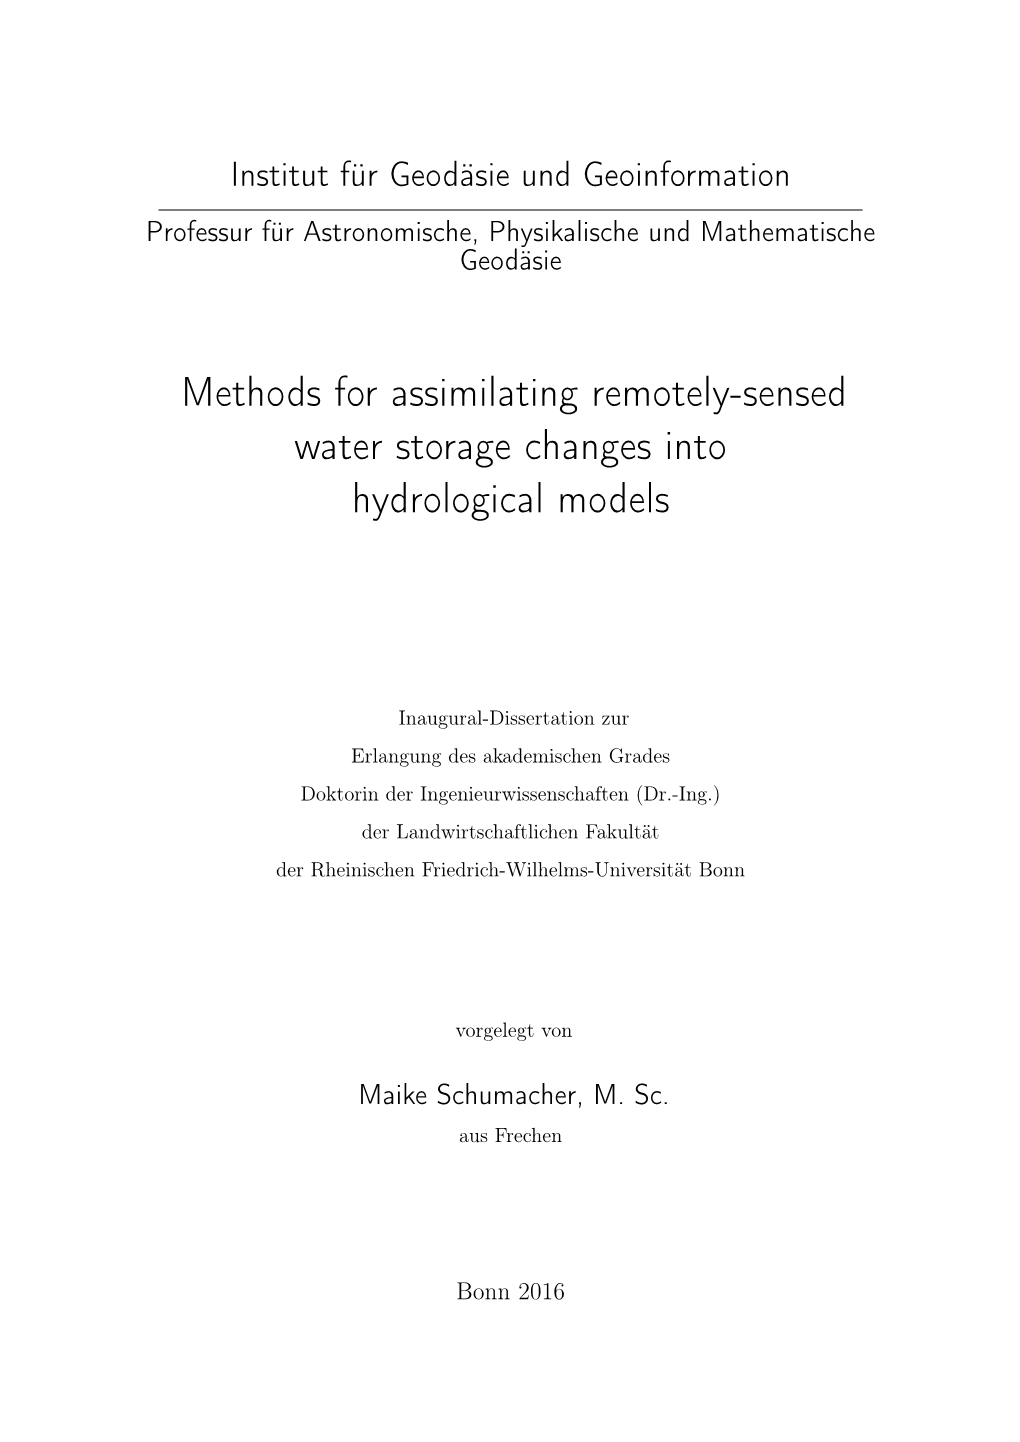 Methods for Assimilating Remotely-Sensed Water Storage Changes Into Hydrological Models